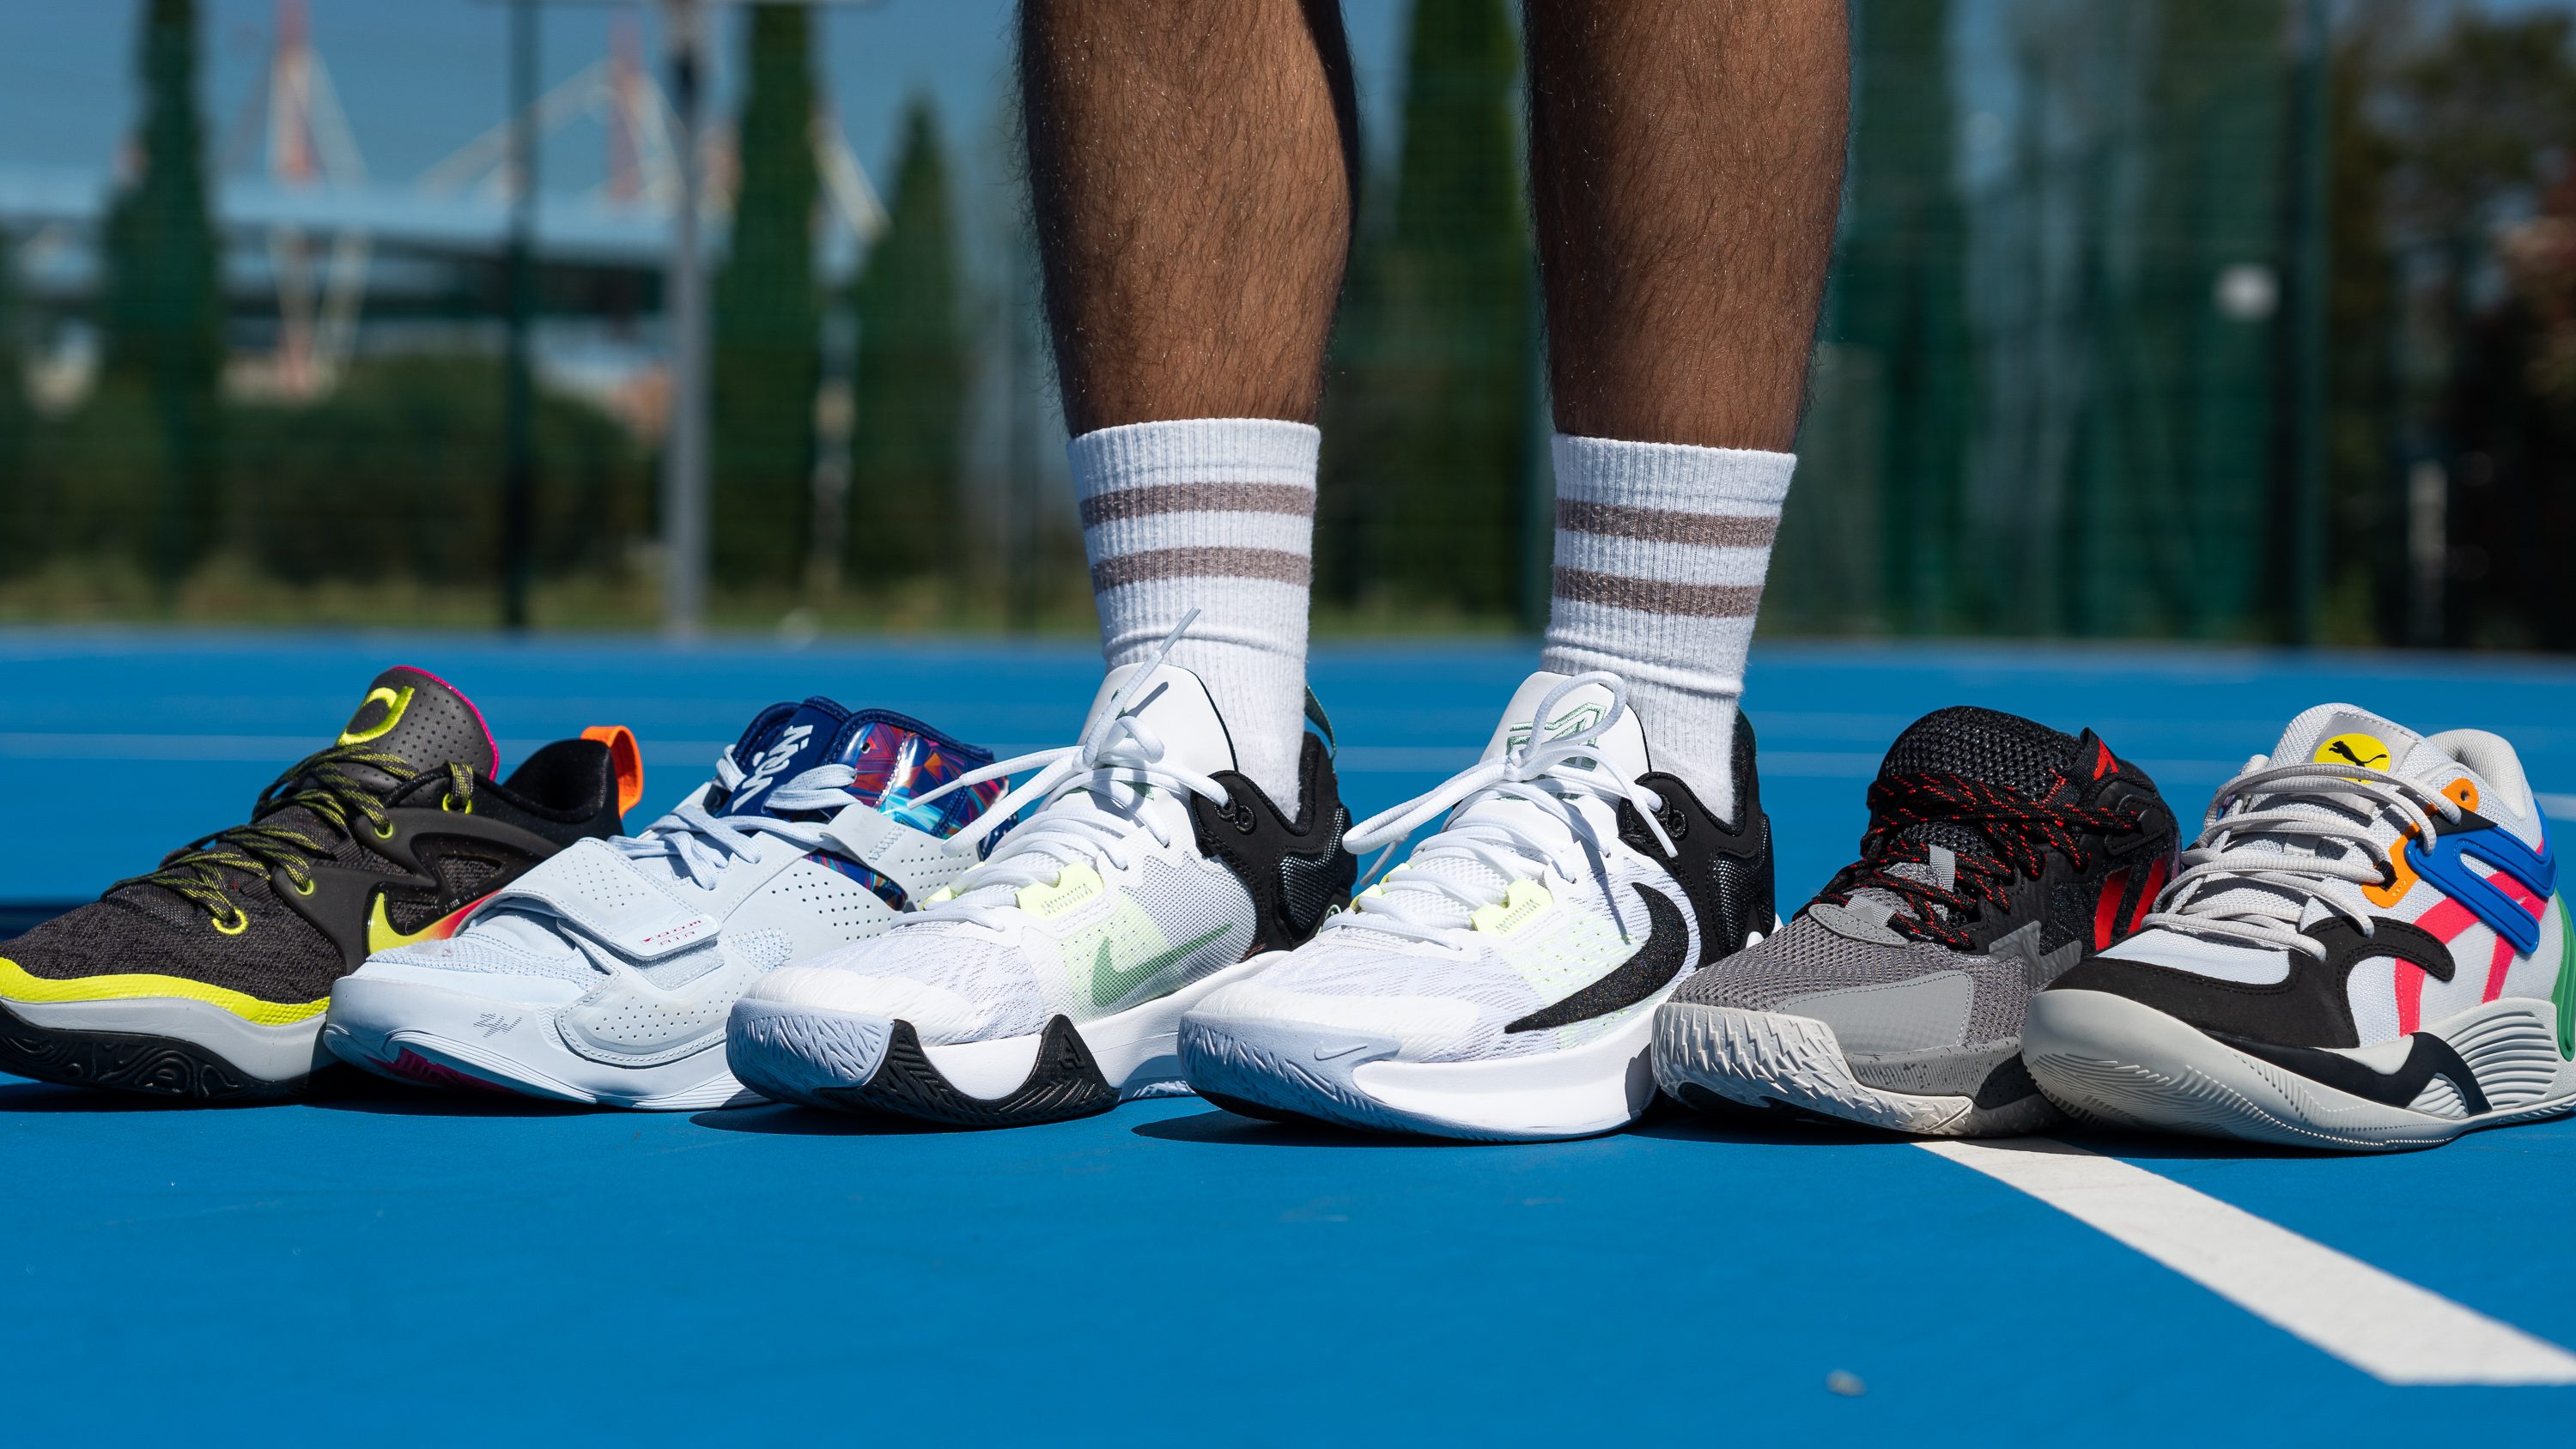 7 Best Outdoor Basketball Shoes